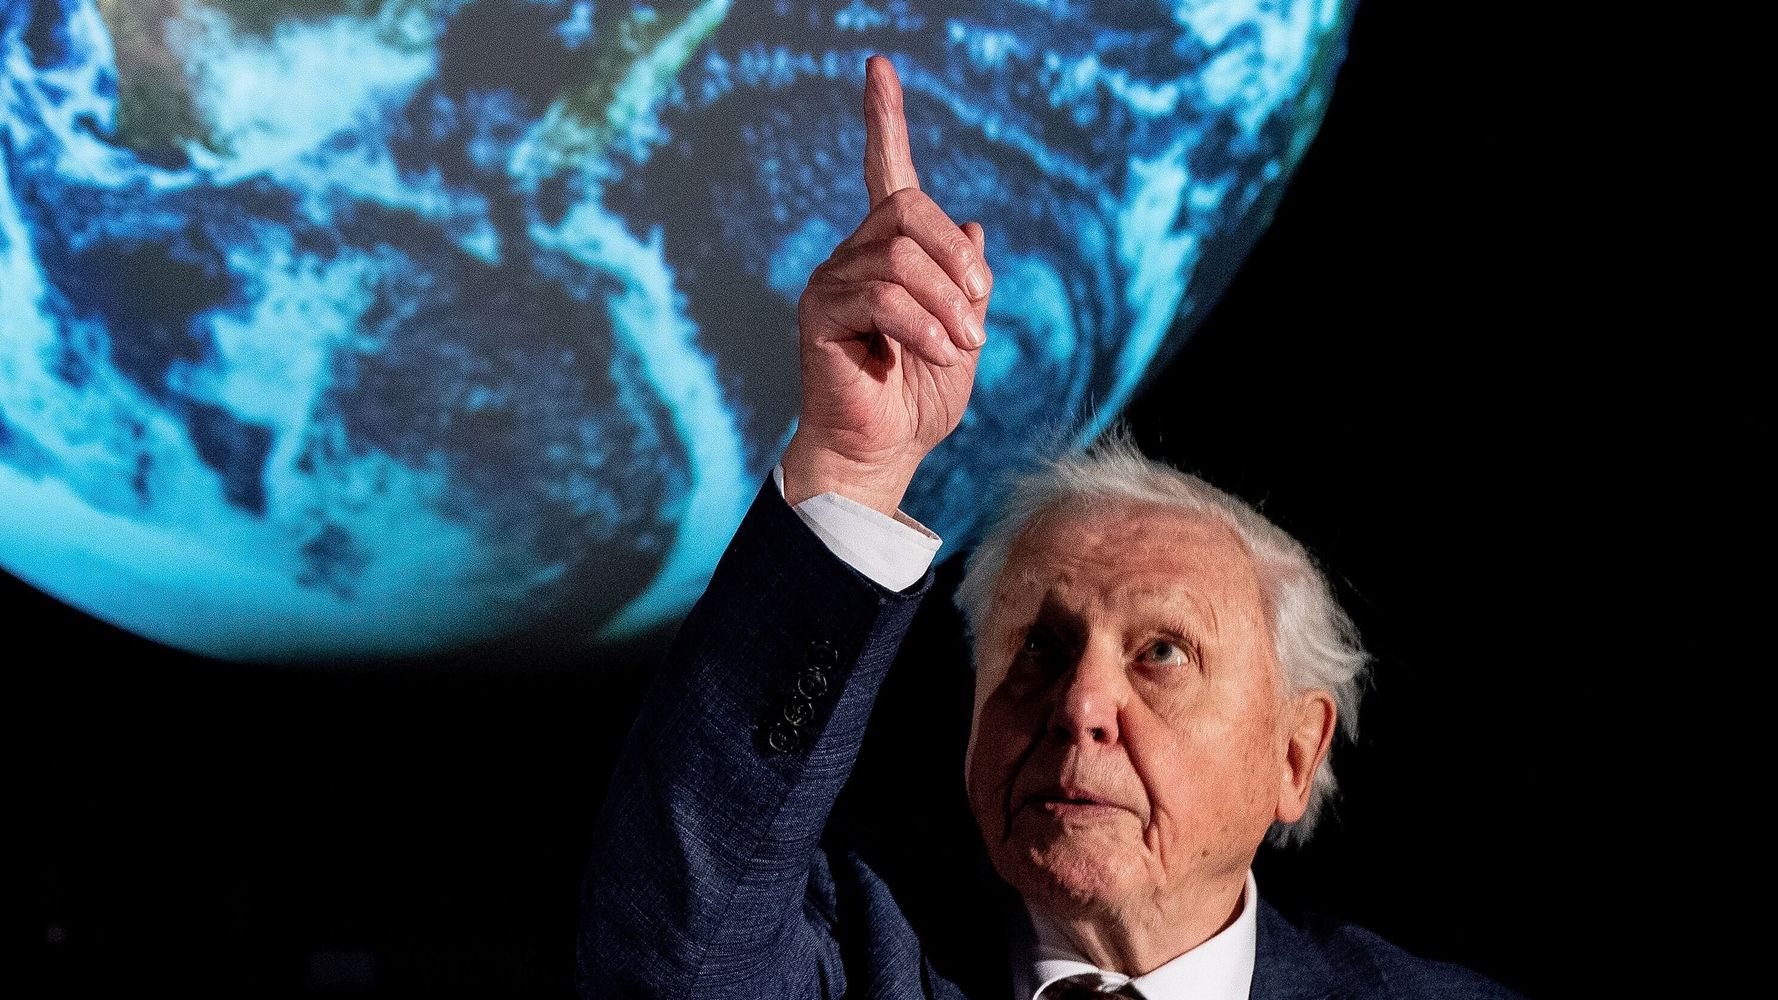 David Attenborough Says Climate Change Is A ‘Crime’ Humanity Has Inflicted On The Planet